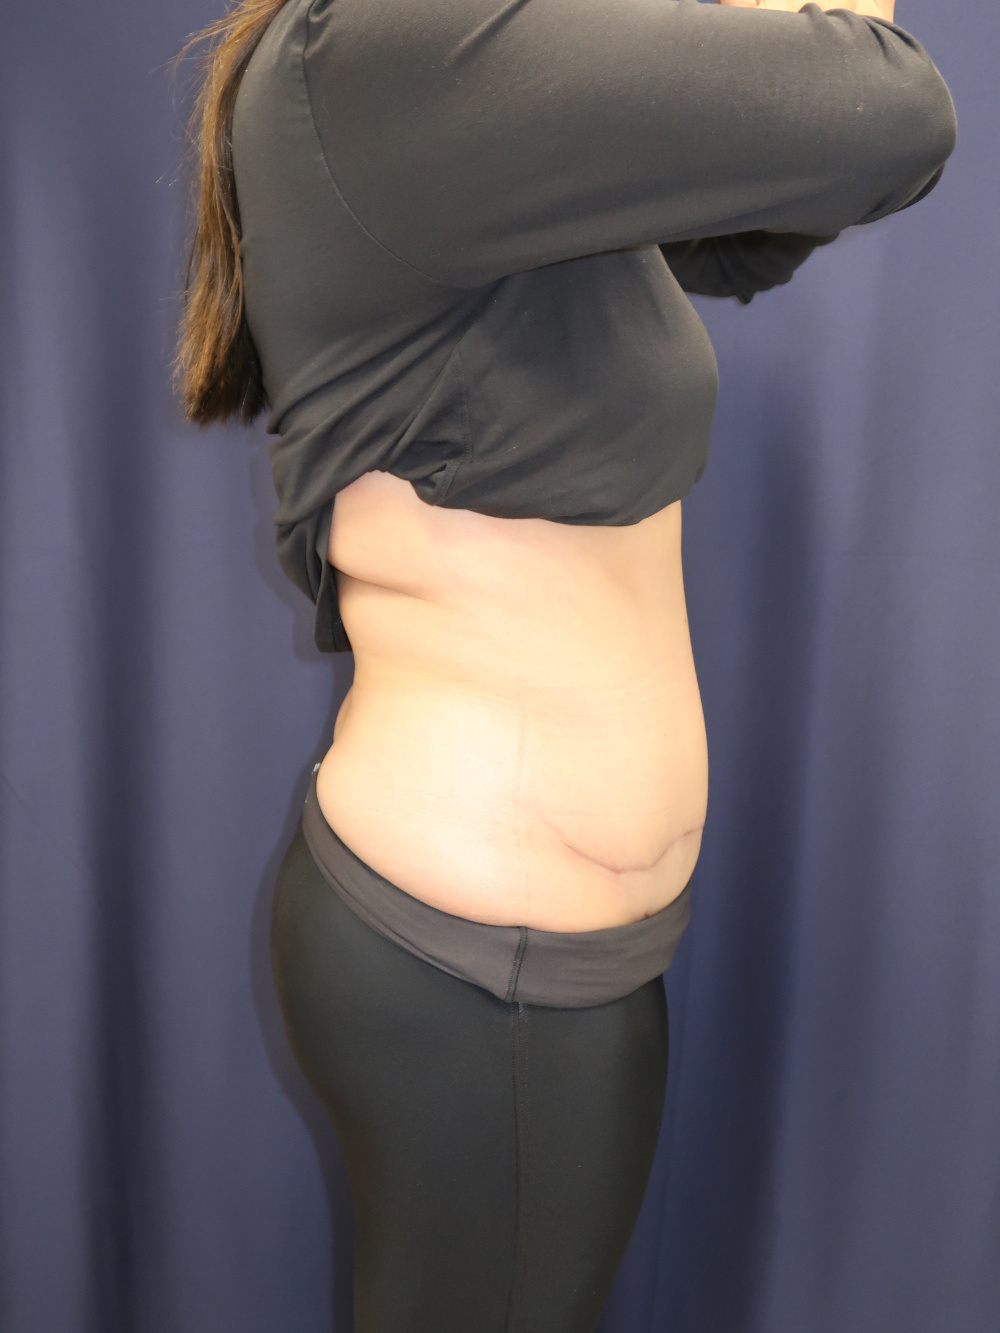 Abdominoplasty (Tummy Tuck) Patient Photo - Case 3743 - after view-2